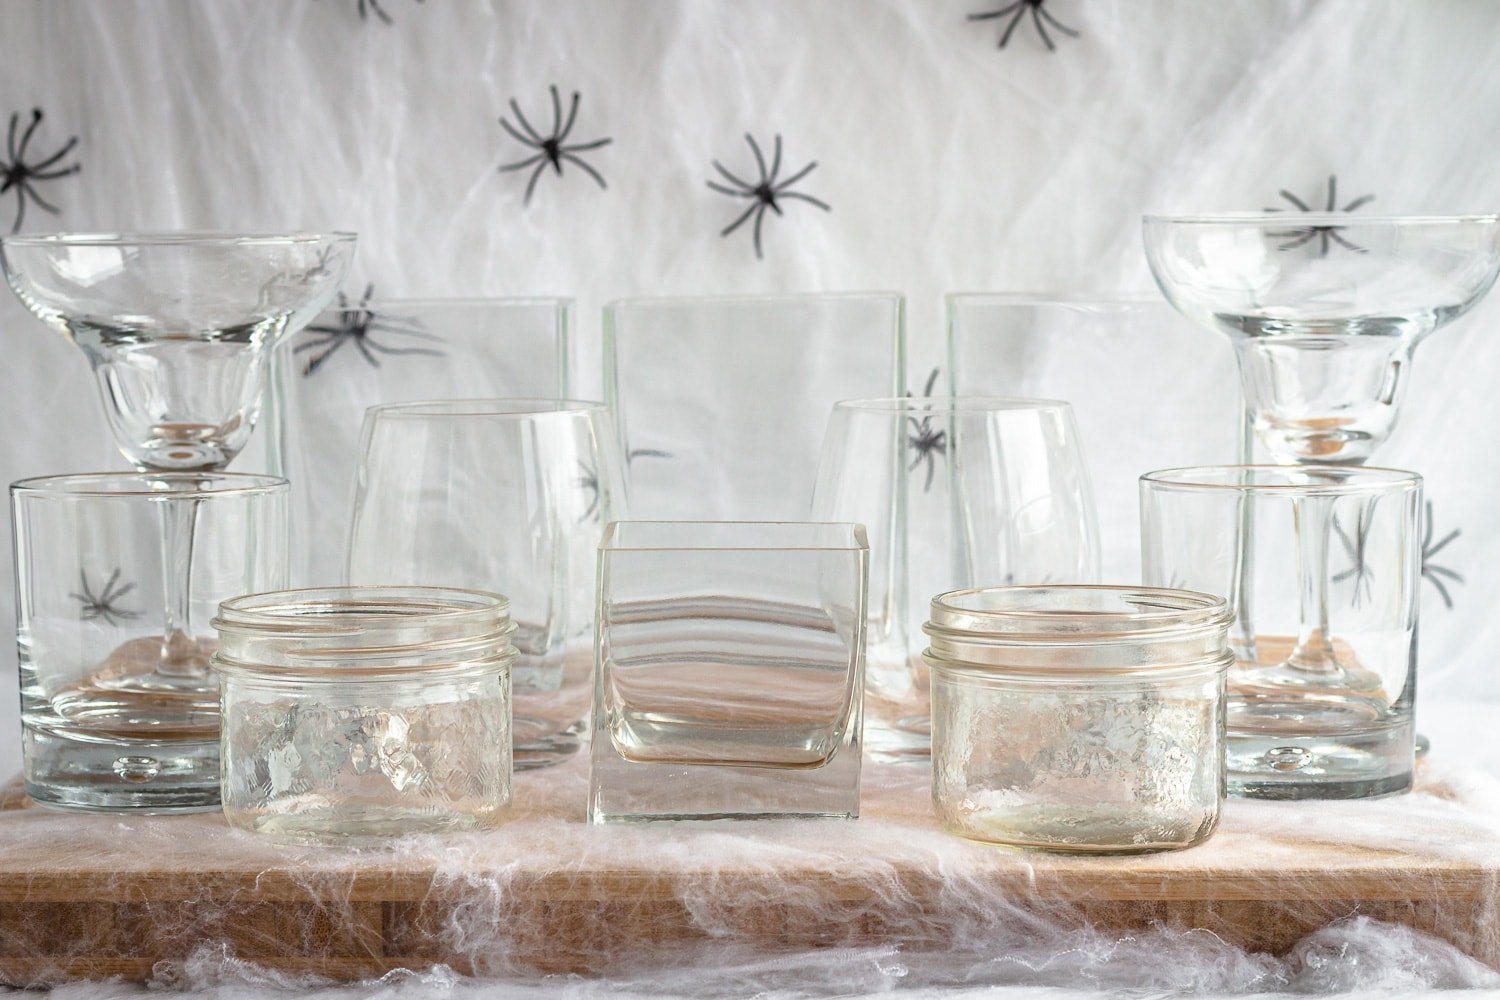 Variety of glassware set on a wooden board surrounded by fake cobwebs and spiders.